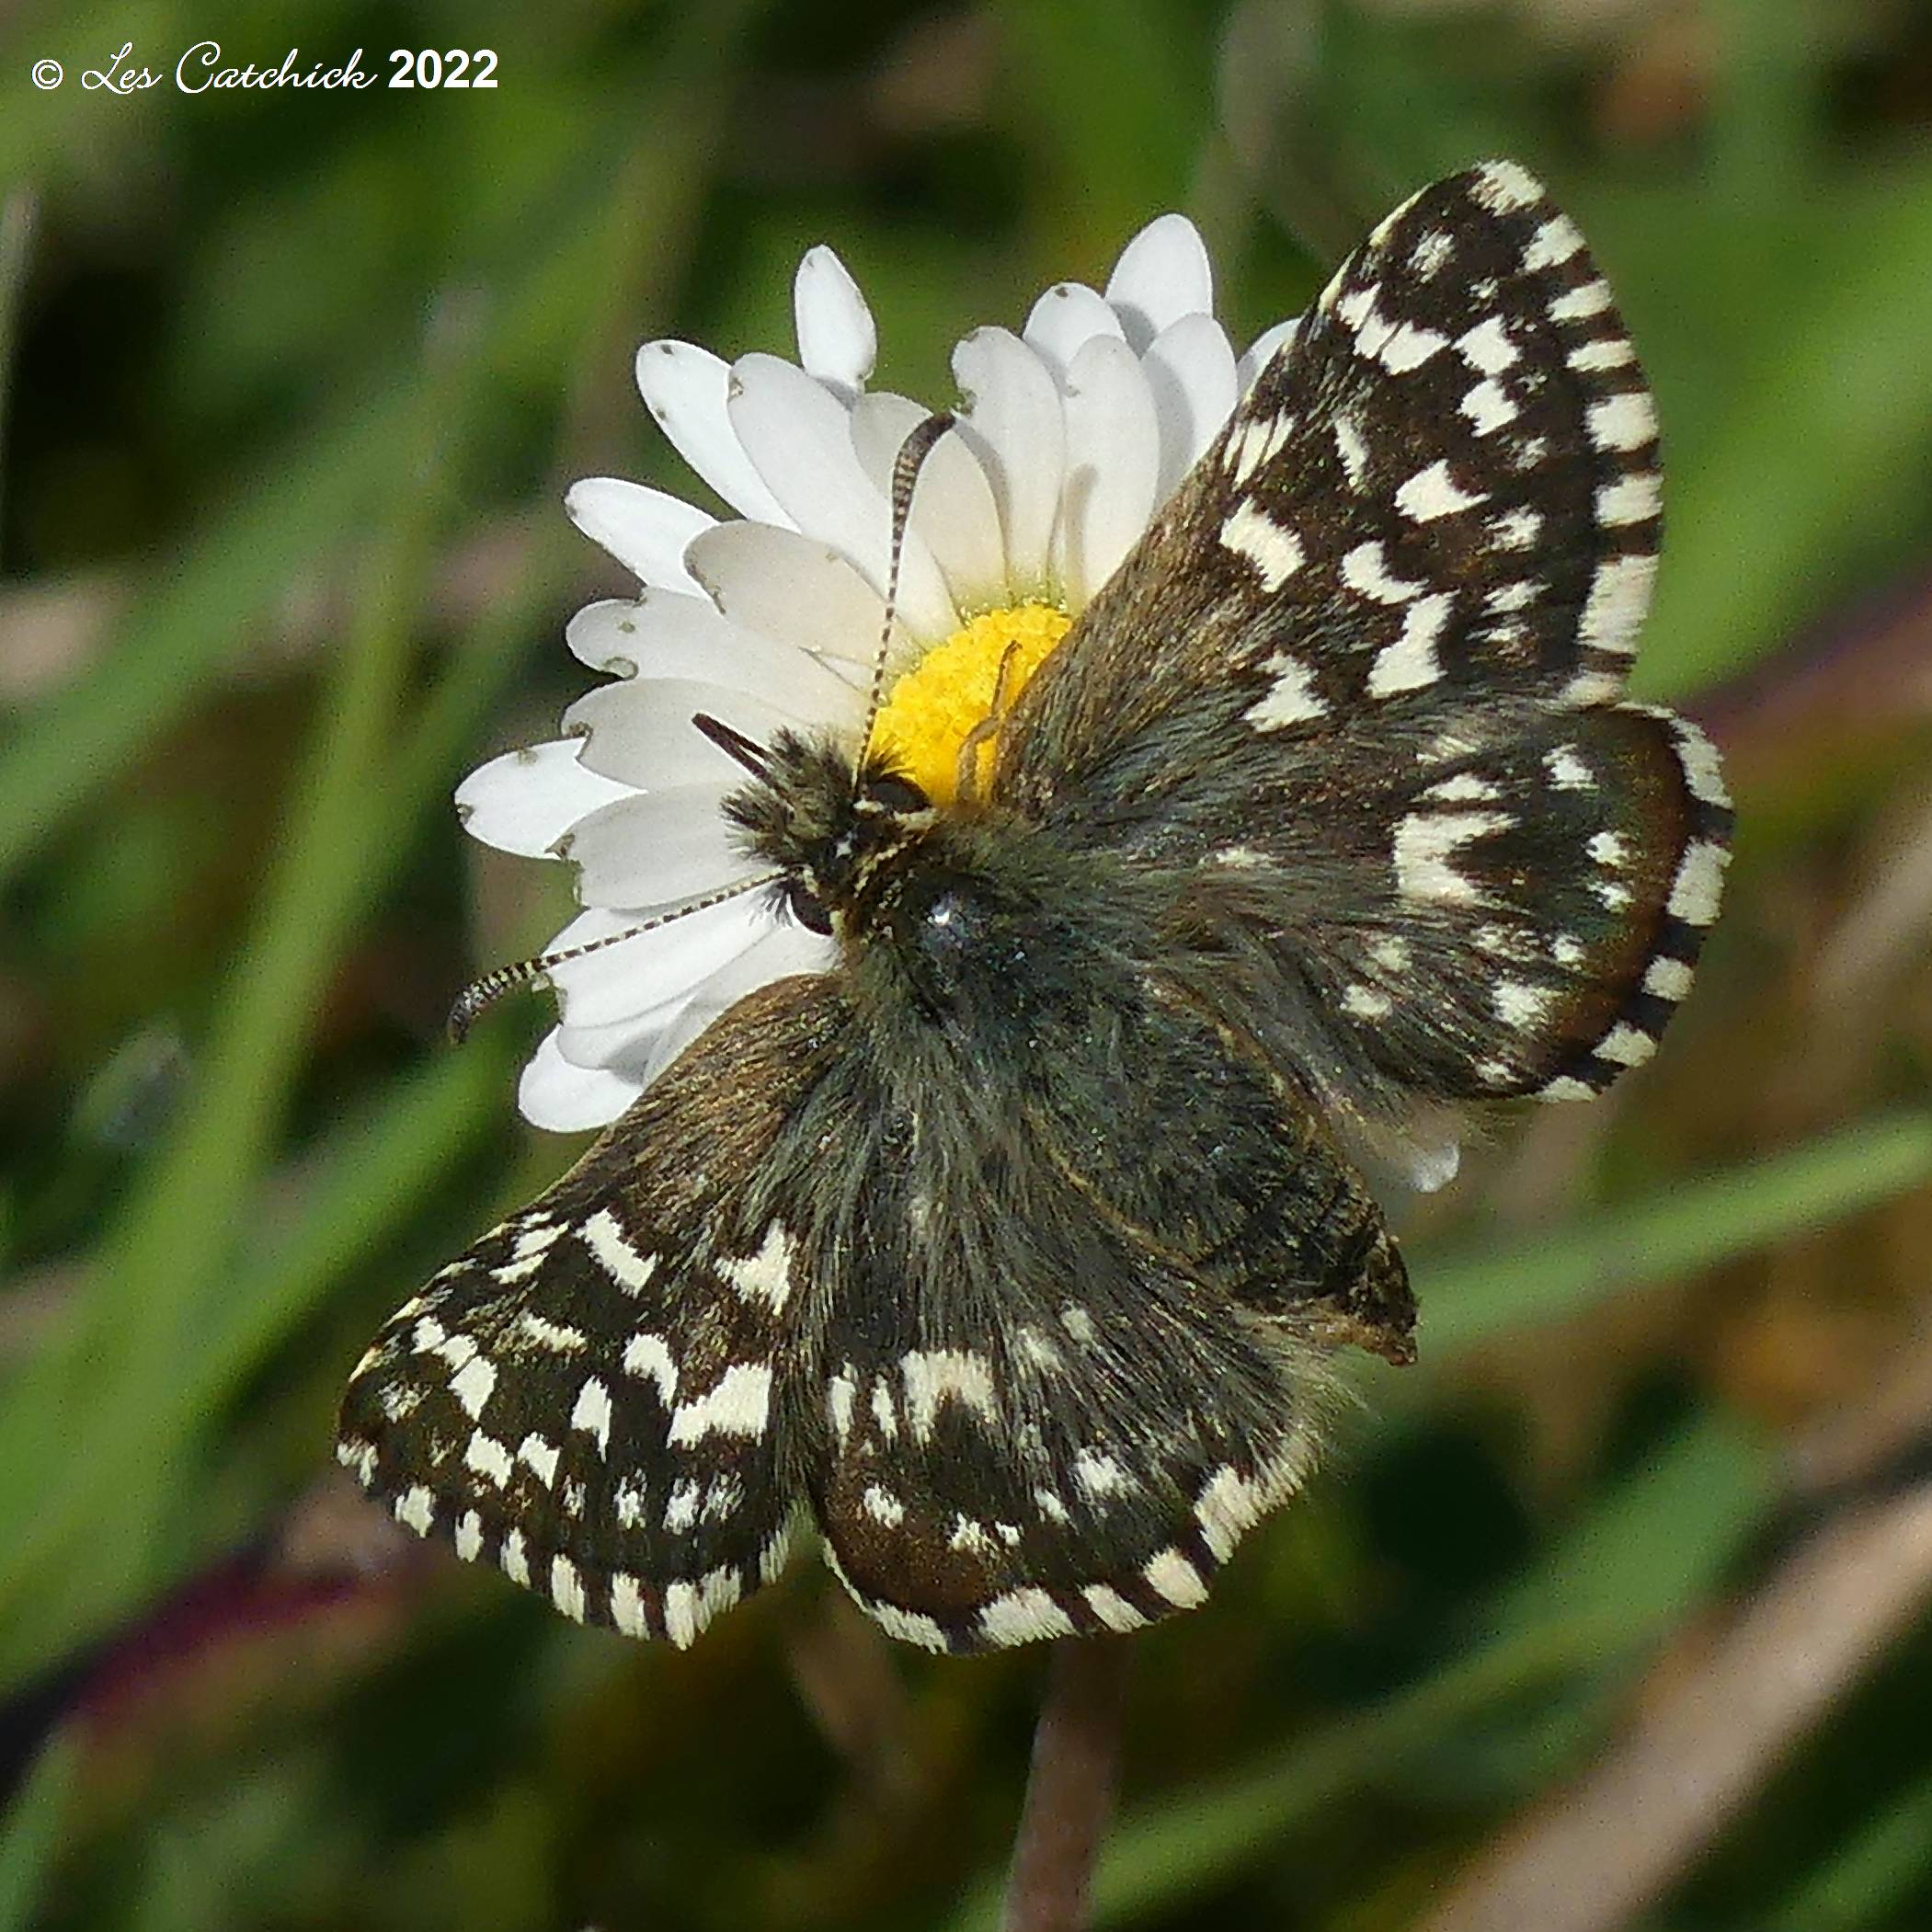 Grizzled Skipper at Twyford (Les Catchick) 050522